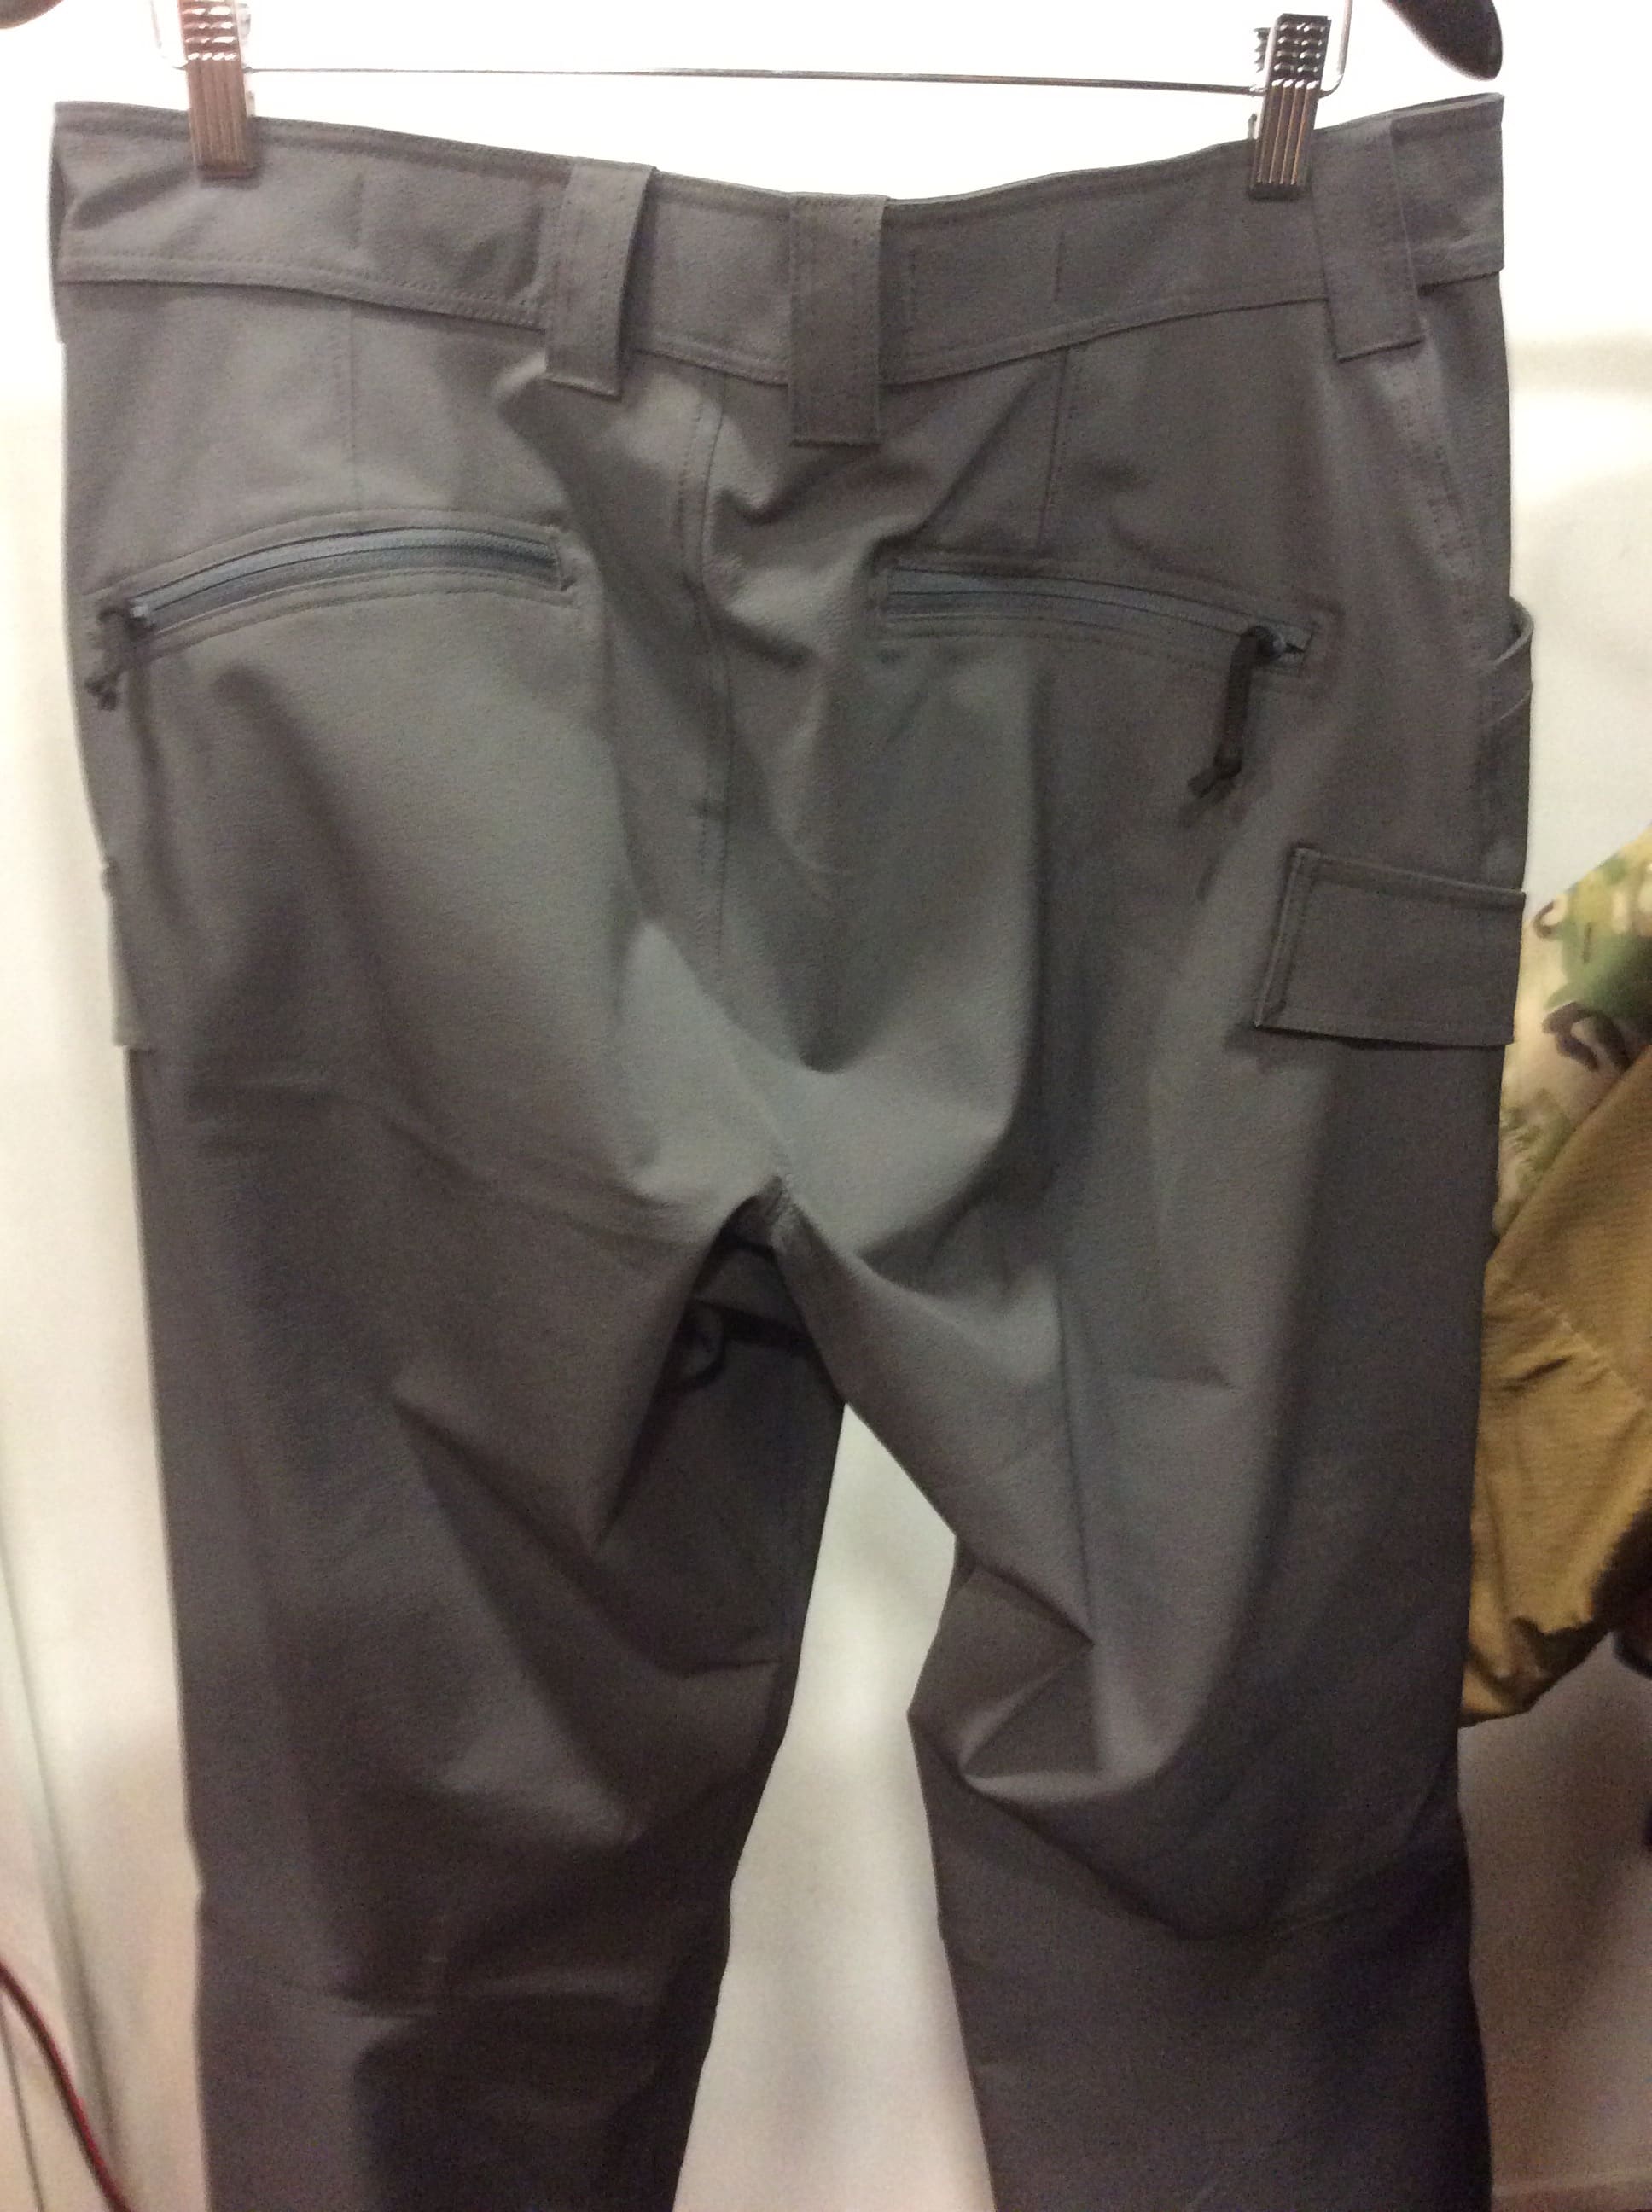 OR - Beyond's Rig Light Back Country Pant | Soldier Systems Daily ...